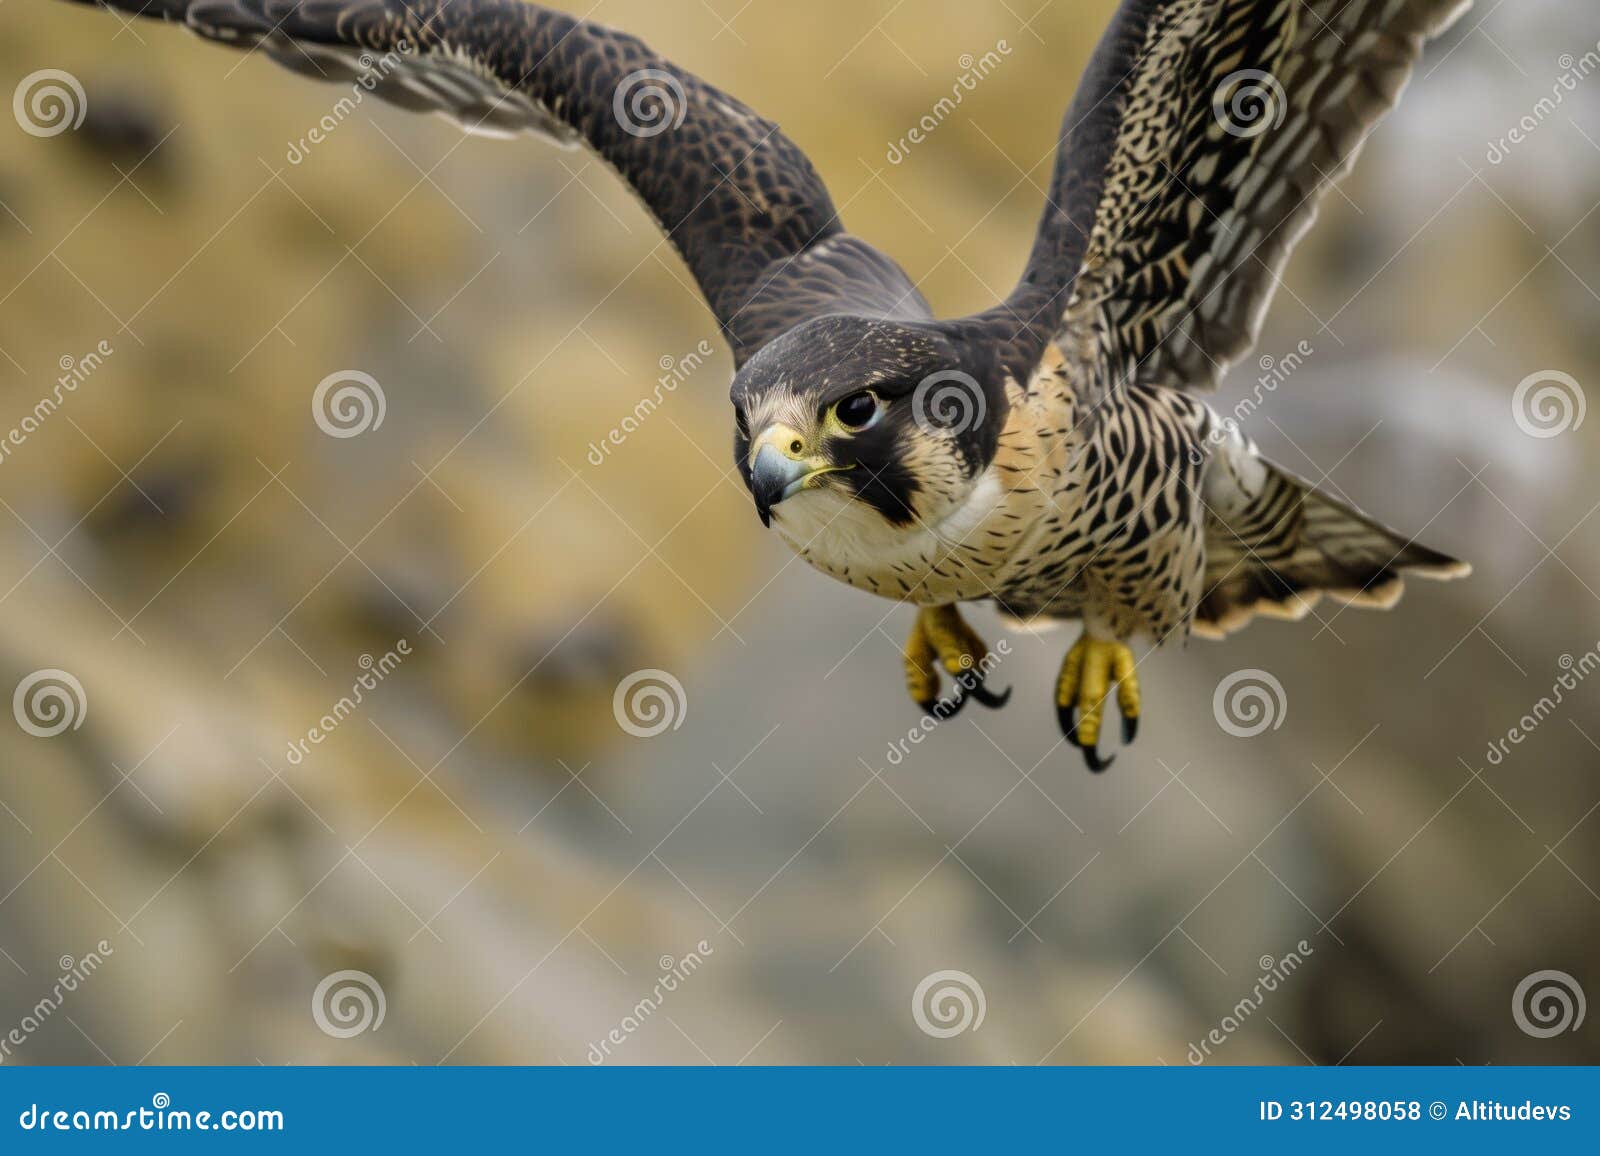 falcon in midflight with wings extended